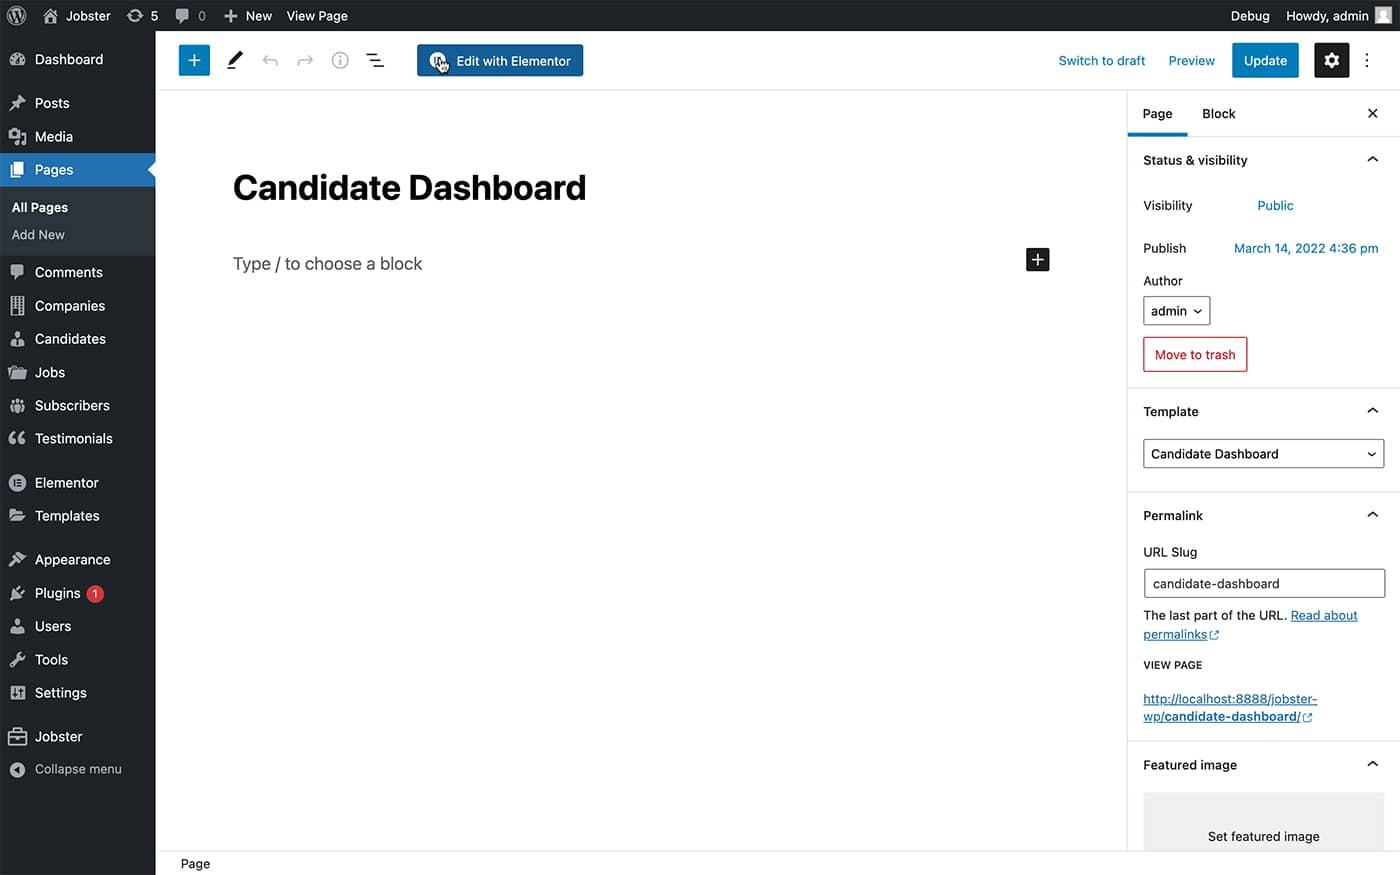 Jobster candidate dashboard page template